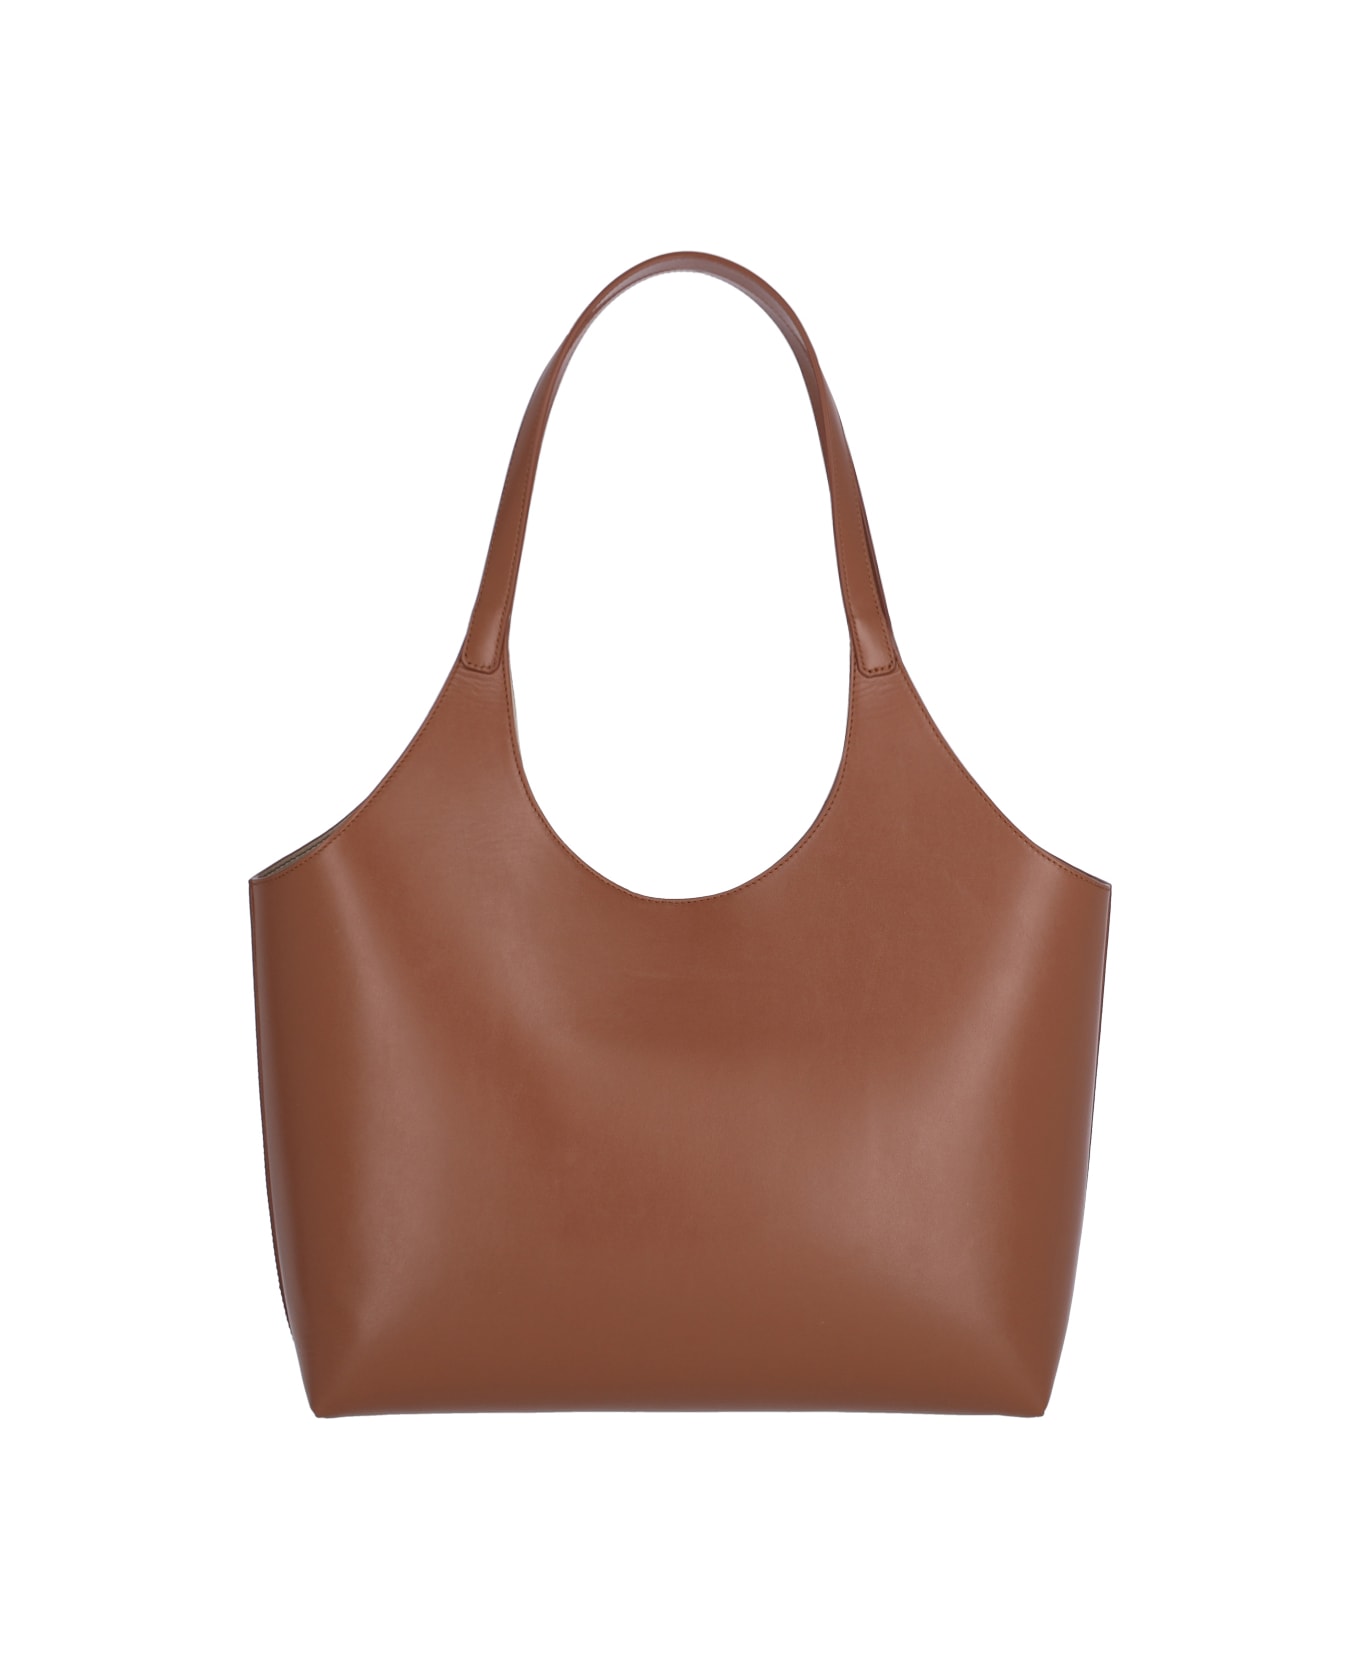 Aesther Ekme 'cabas' Tote Bag - Brown トートバッグ